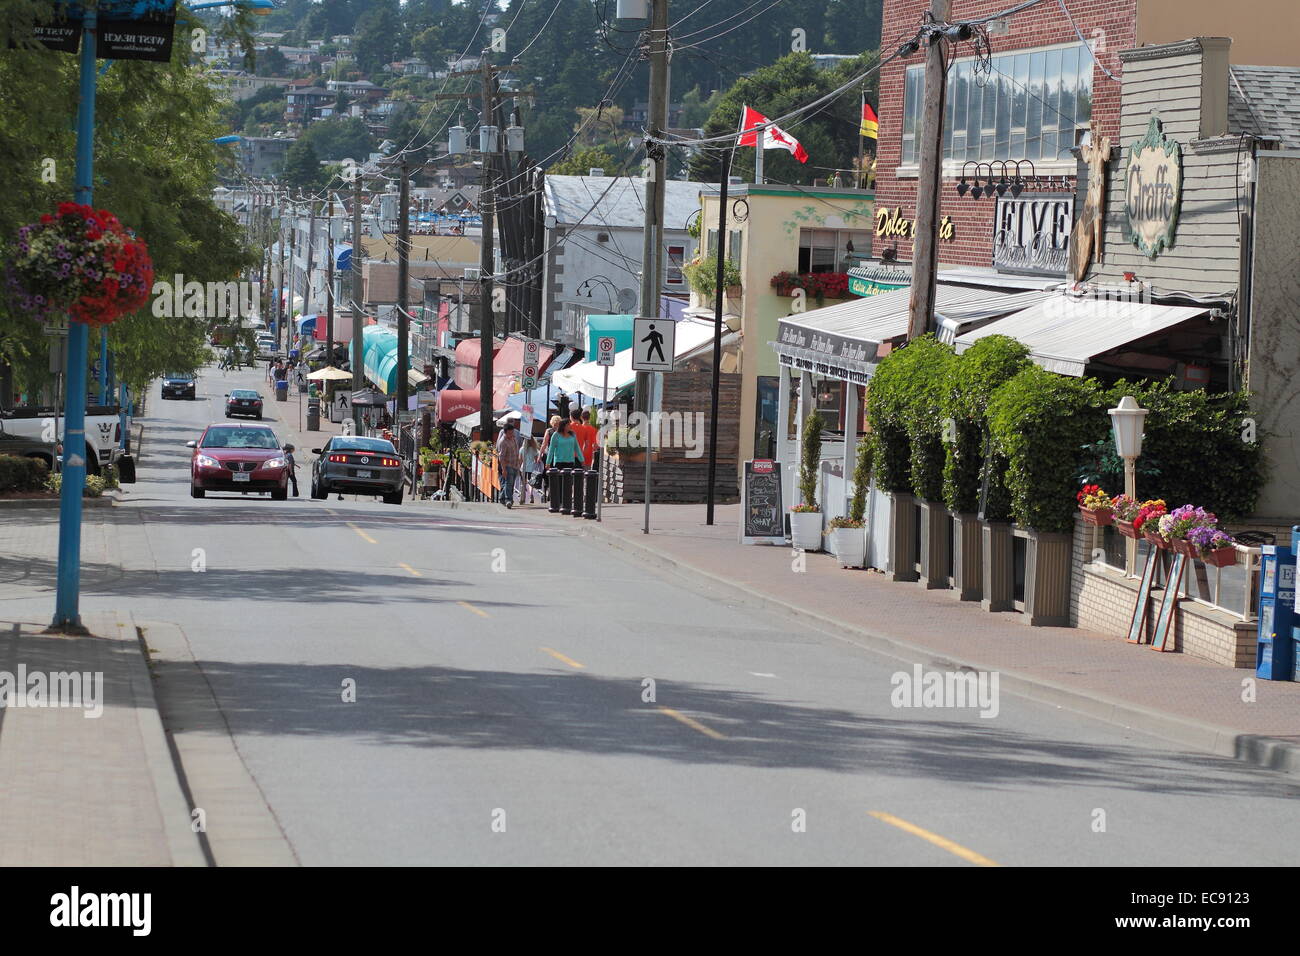 A warm sunny day in the Tourist Town of White Rock, British Columbia. Stock Photo